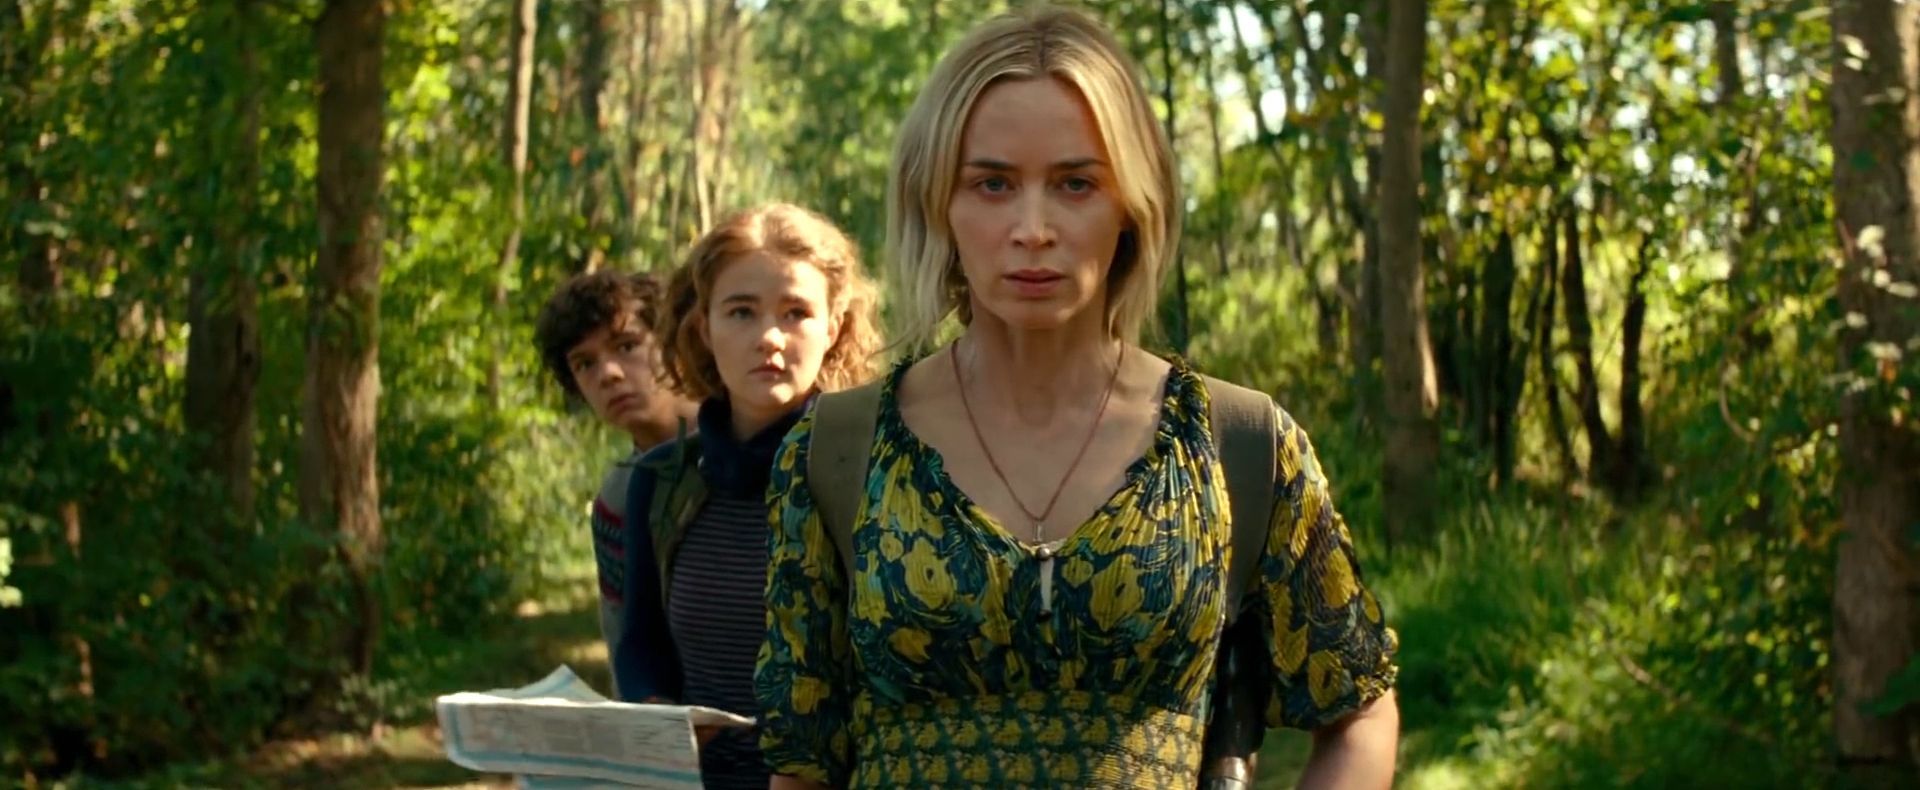 A Quiet Place 2 - streaming release